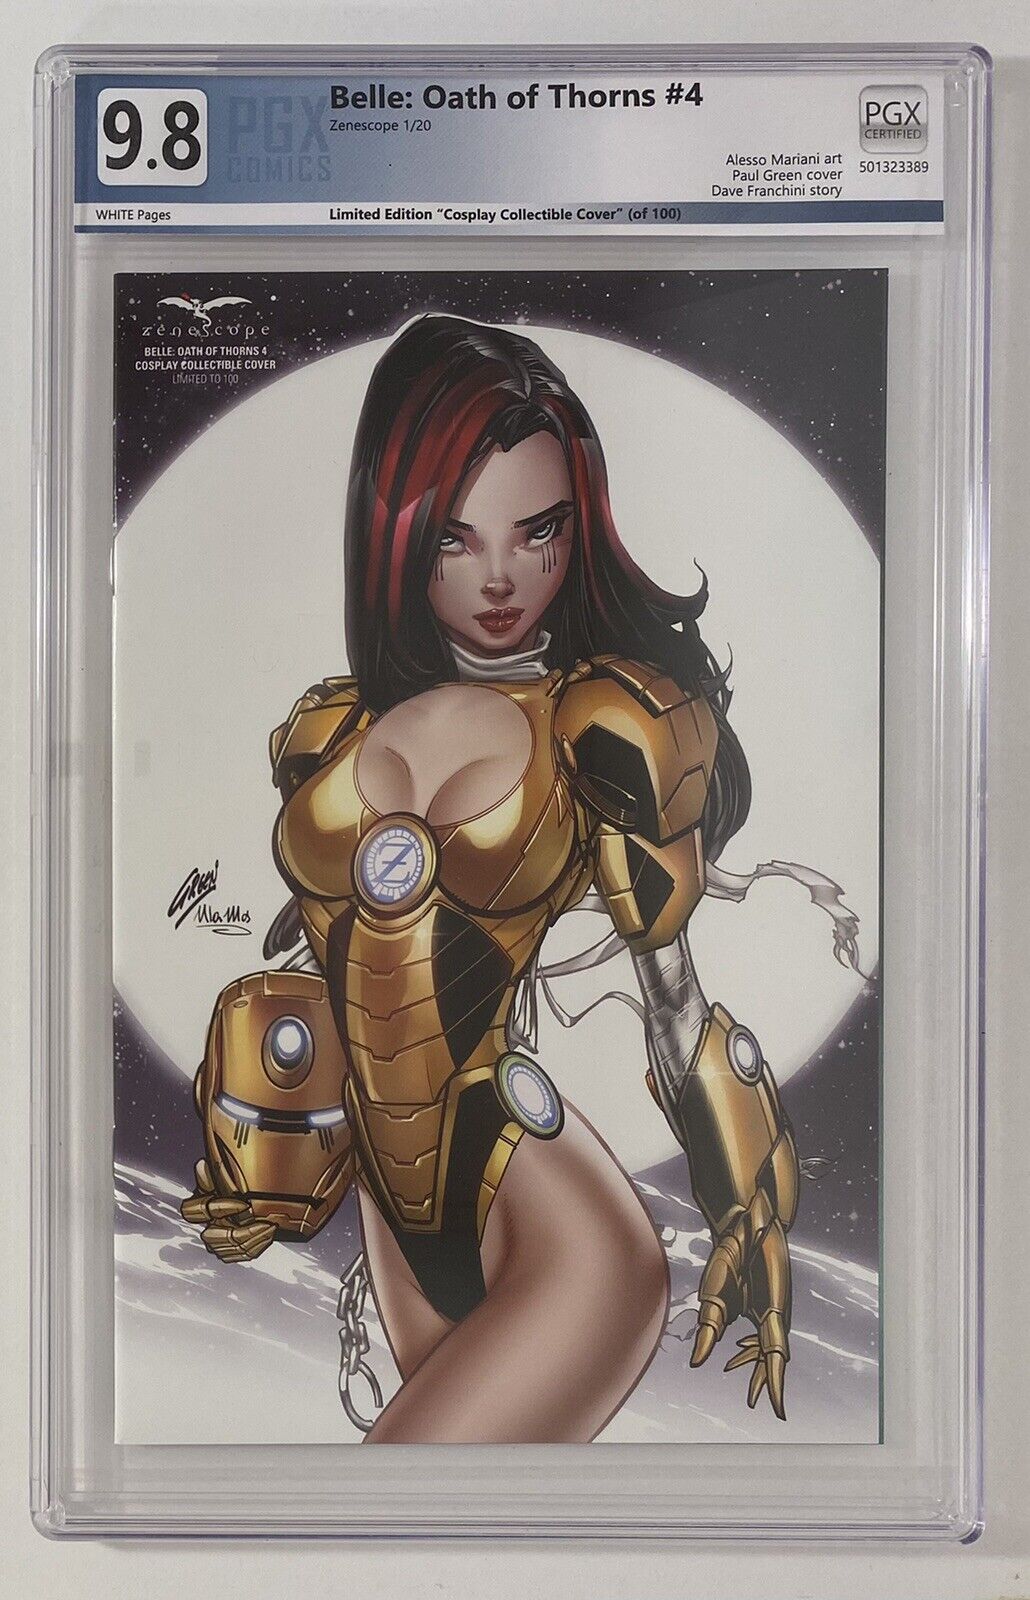 Belle: Oath of Thorns 4 - Rare Gold Iron Man Cosplay LE100 (Green) - PGX 9.8